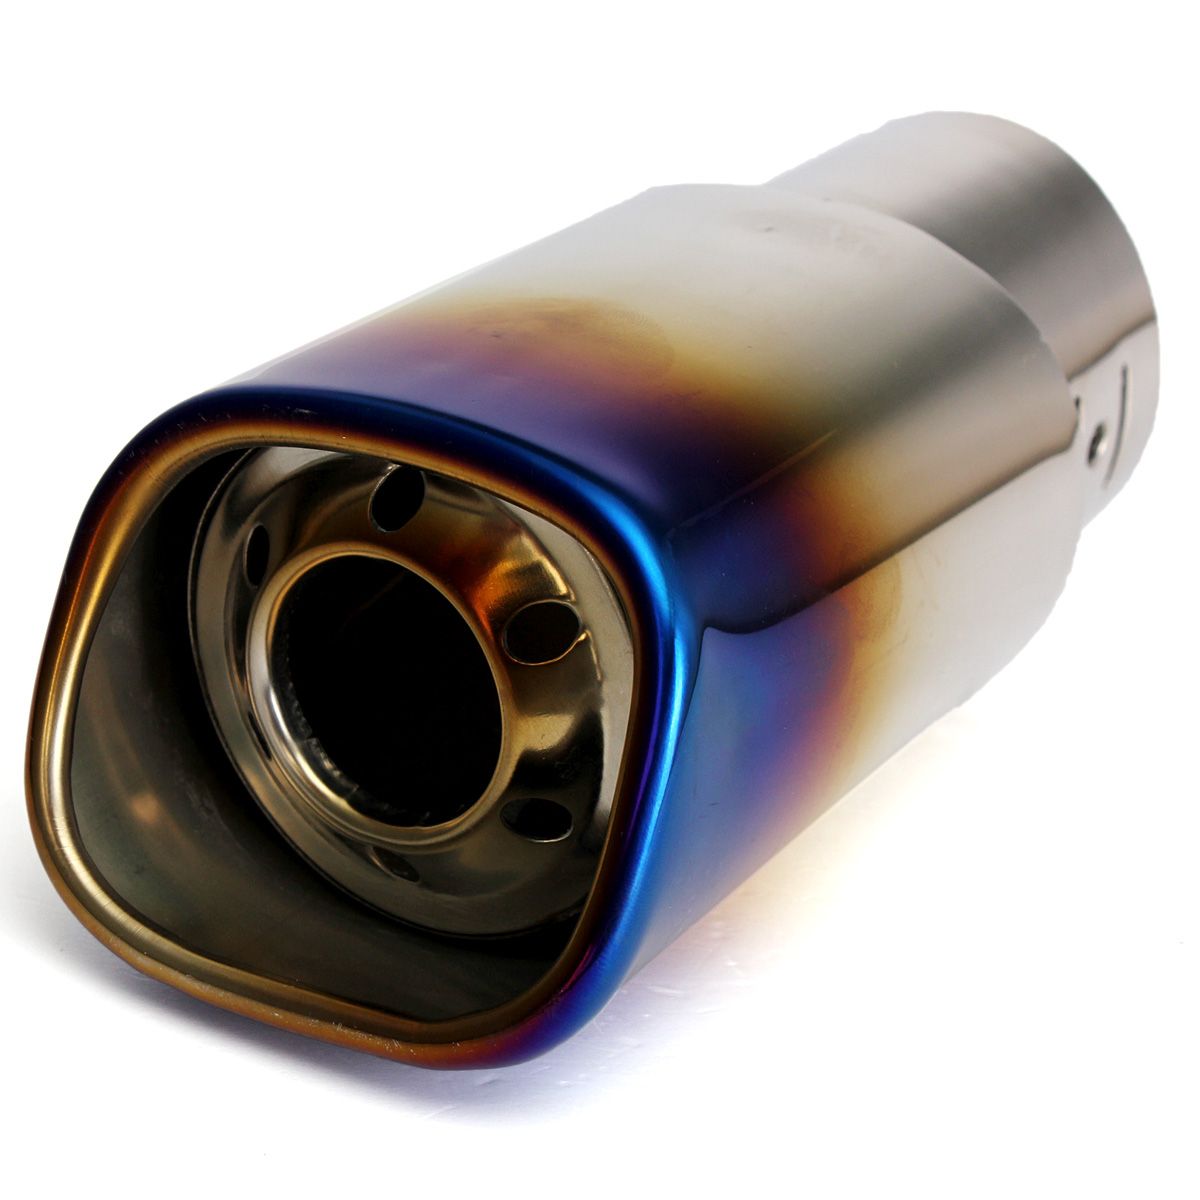 New-Oval-Sport-Chrome-Exhaust-Tailpipe-Muffler-Tip-Trim-End-for-Land-Rover-Sport-1014680